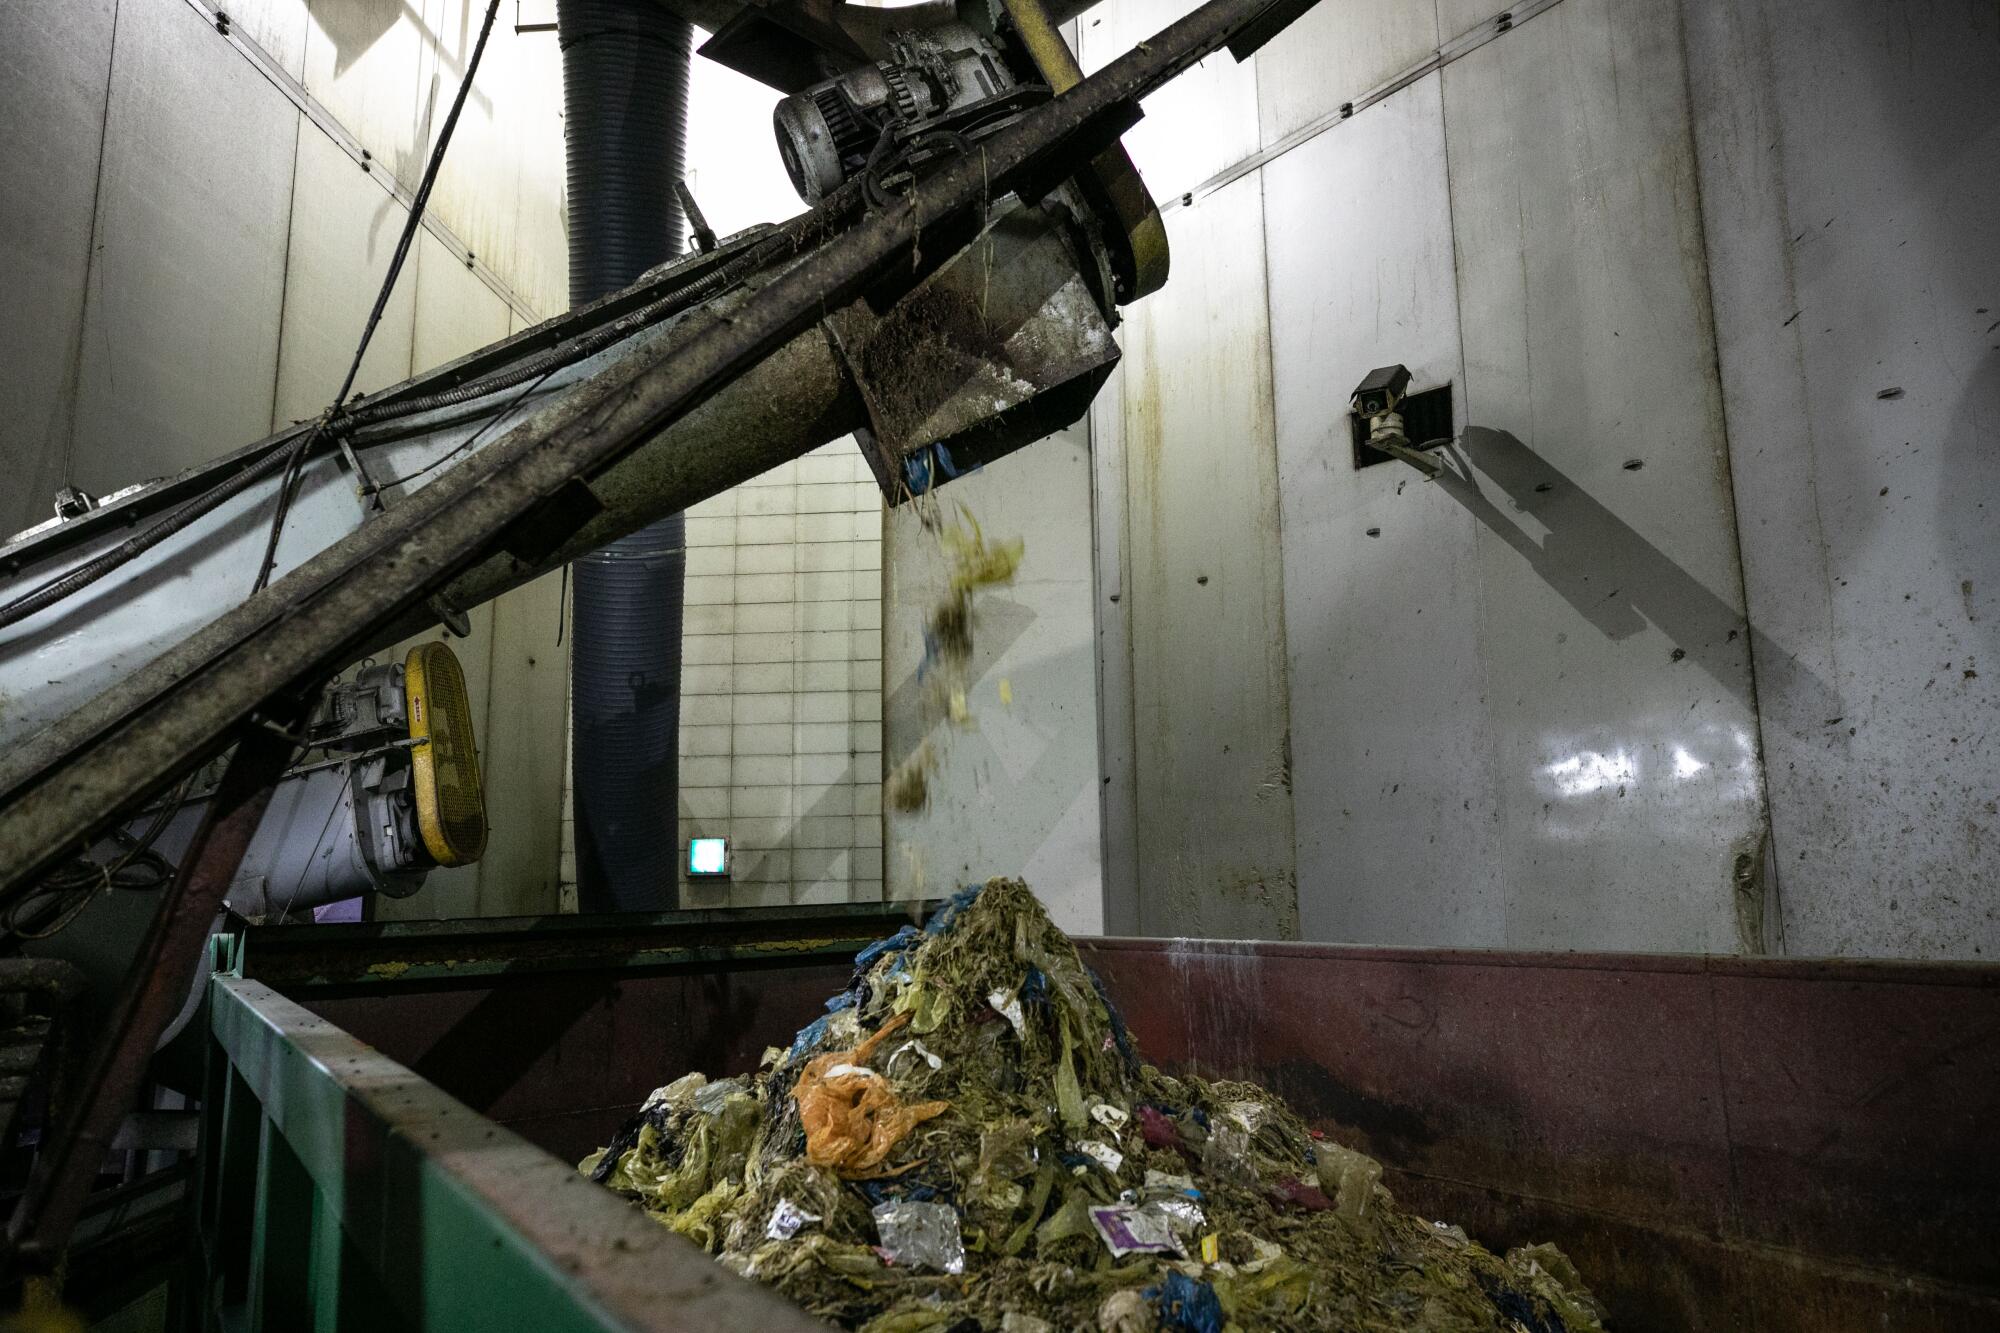 The machine drops plastic bags to a container after the separation machine.